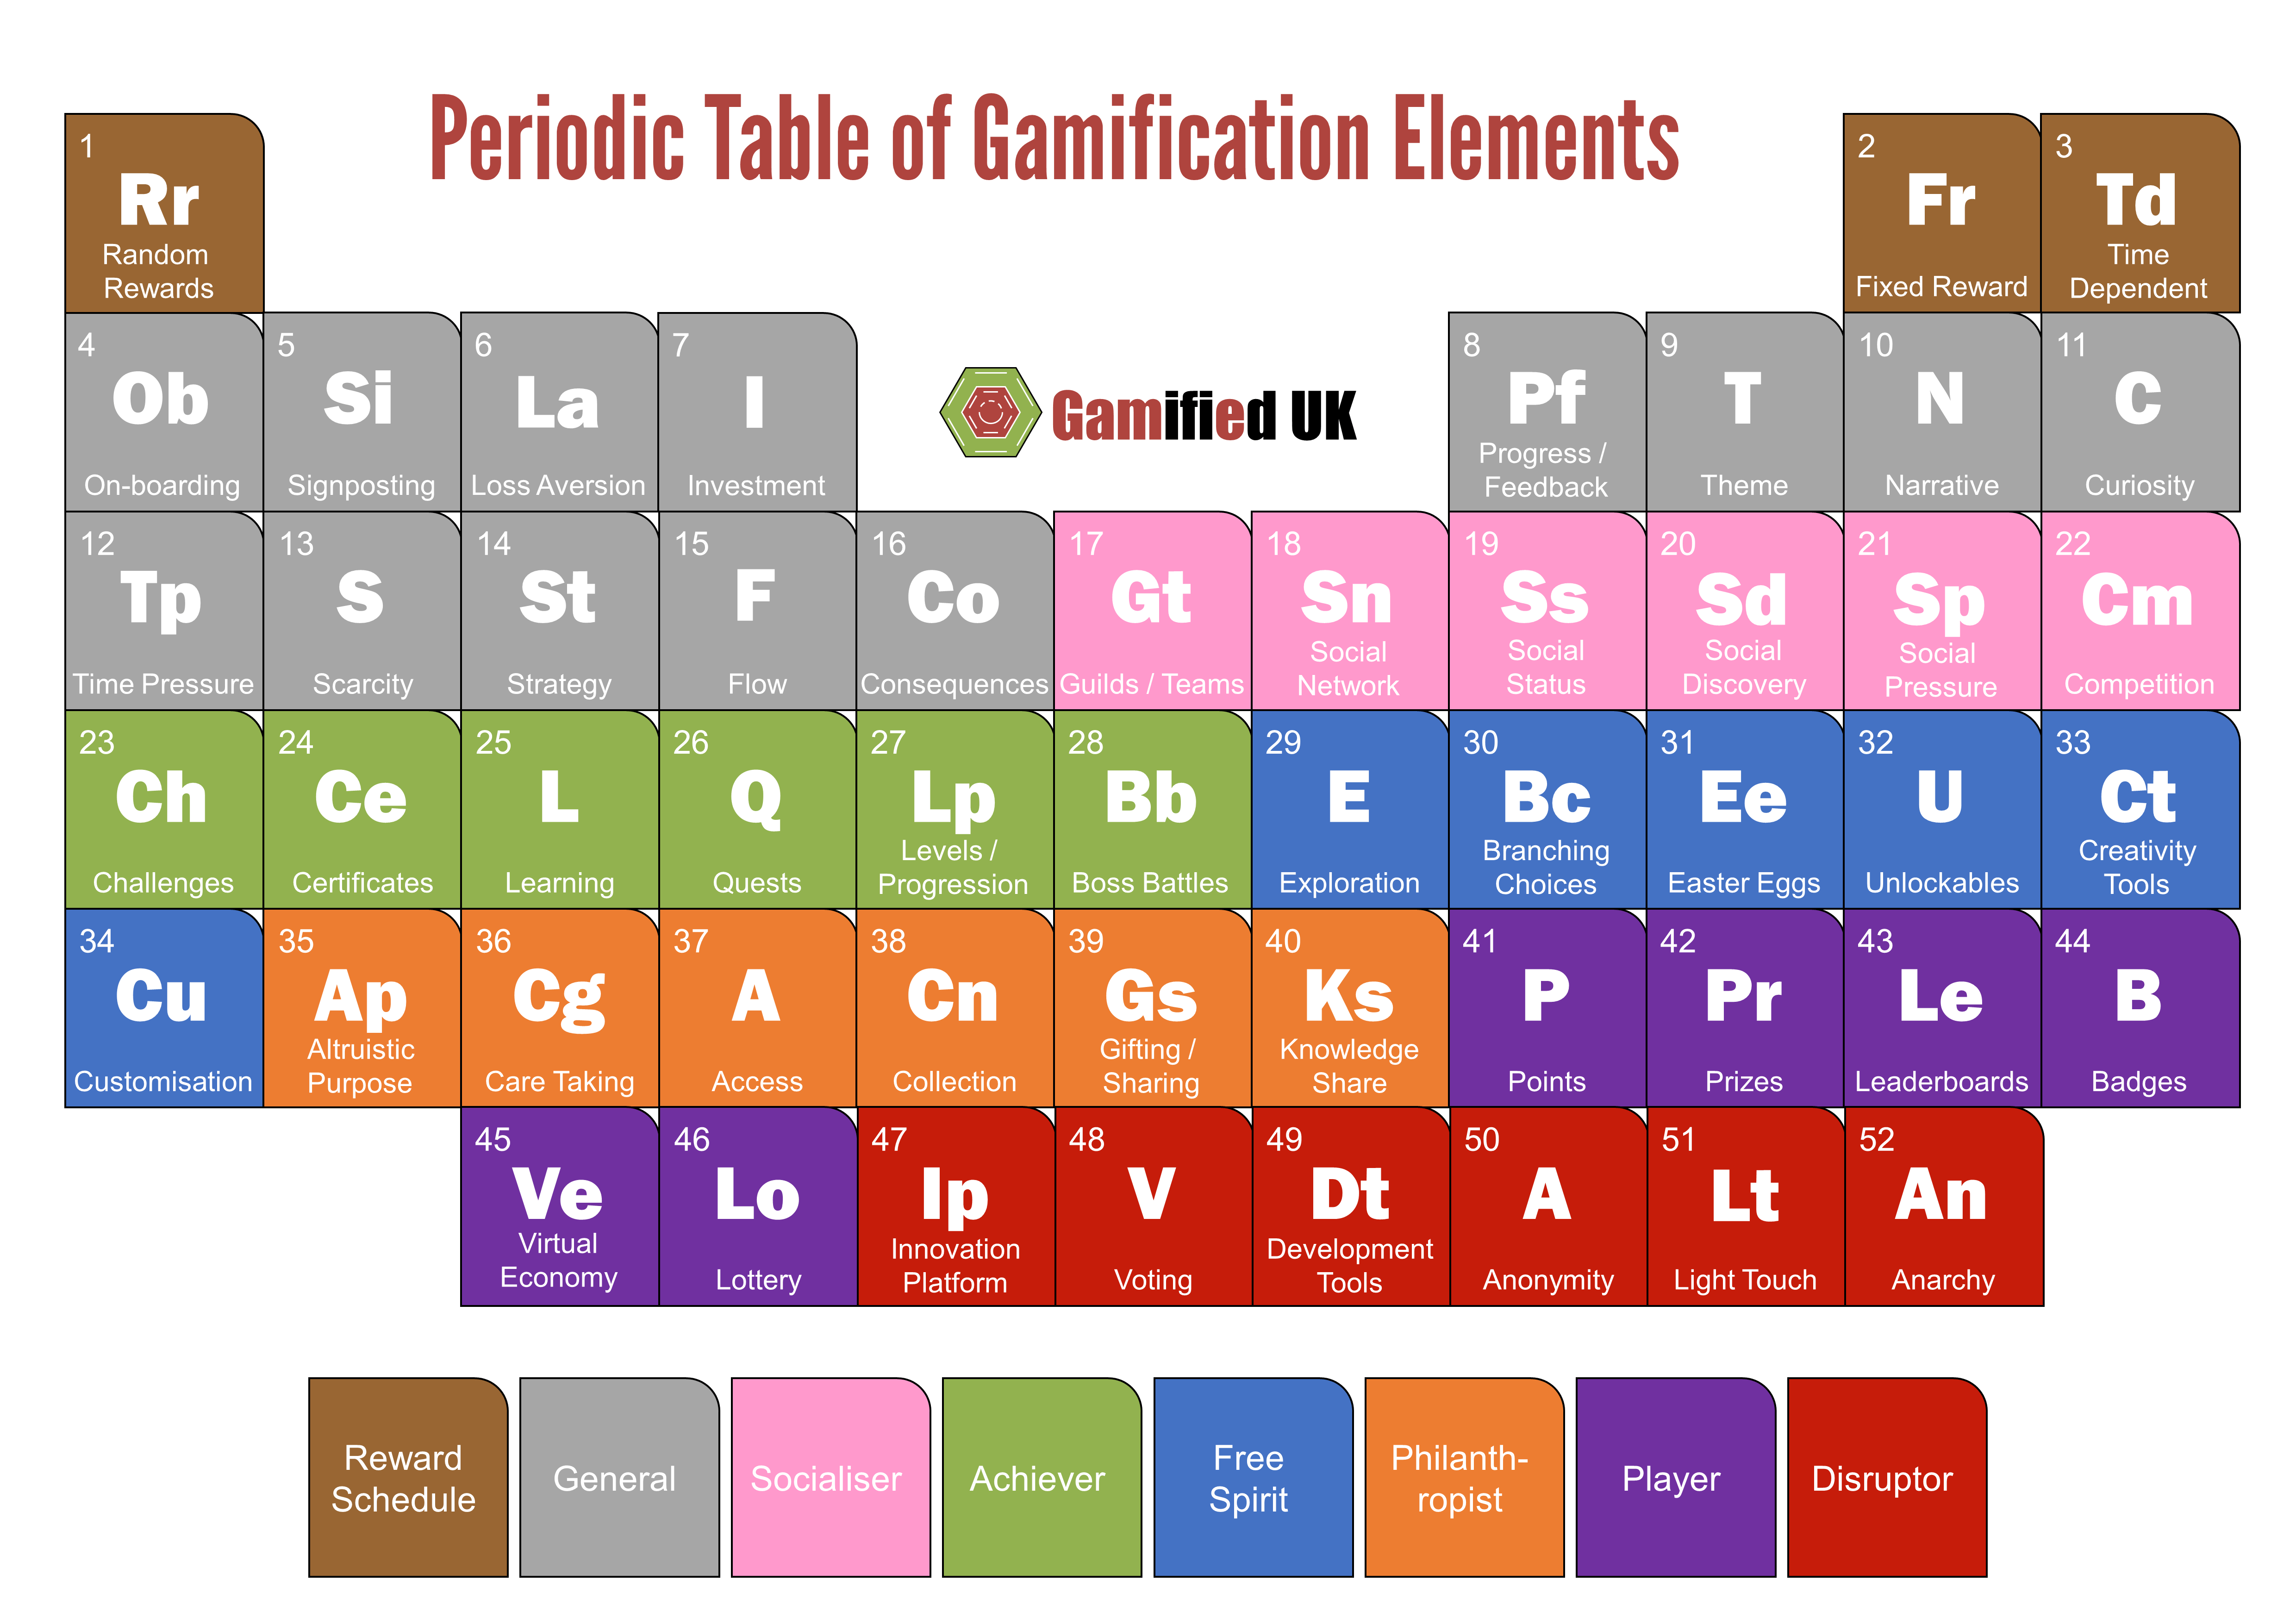 Periodic Table of Gamification Elements The Periodic Table of Gamification Elements